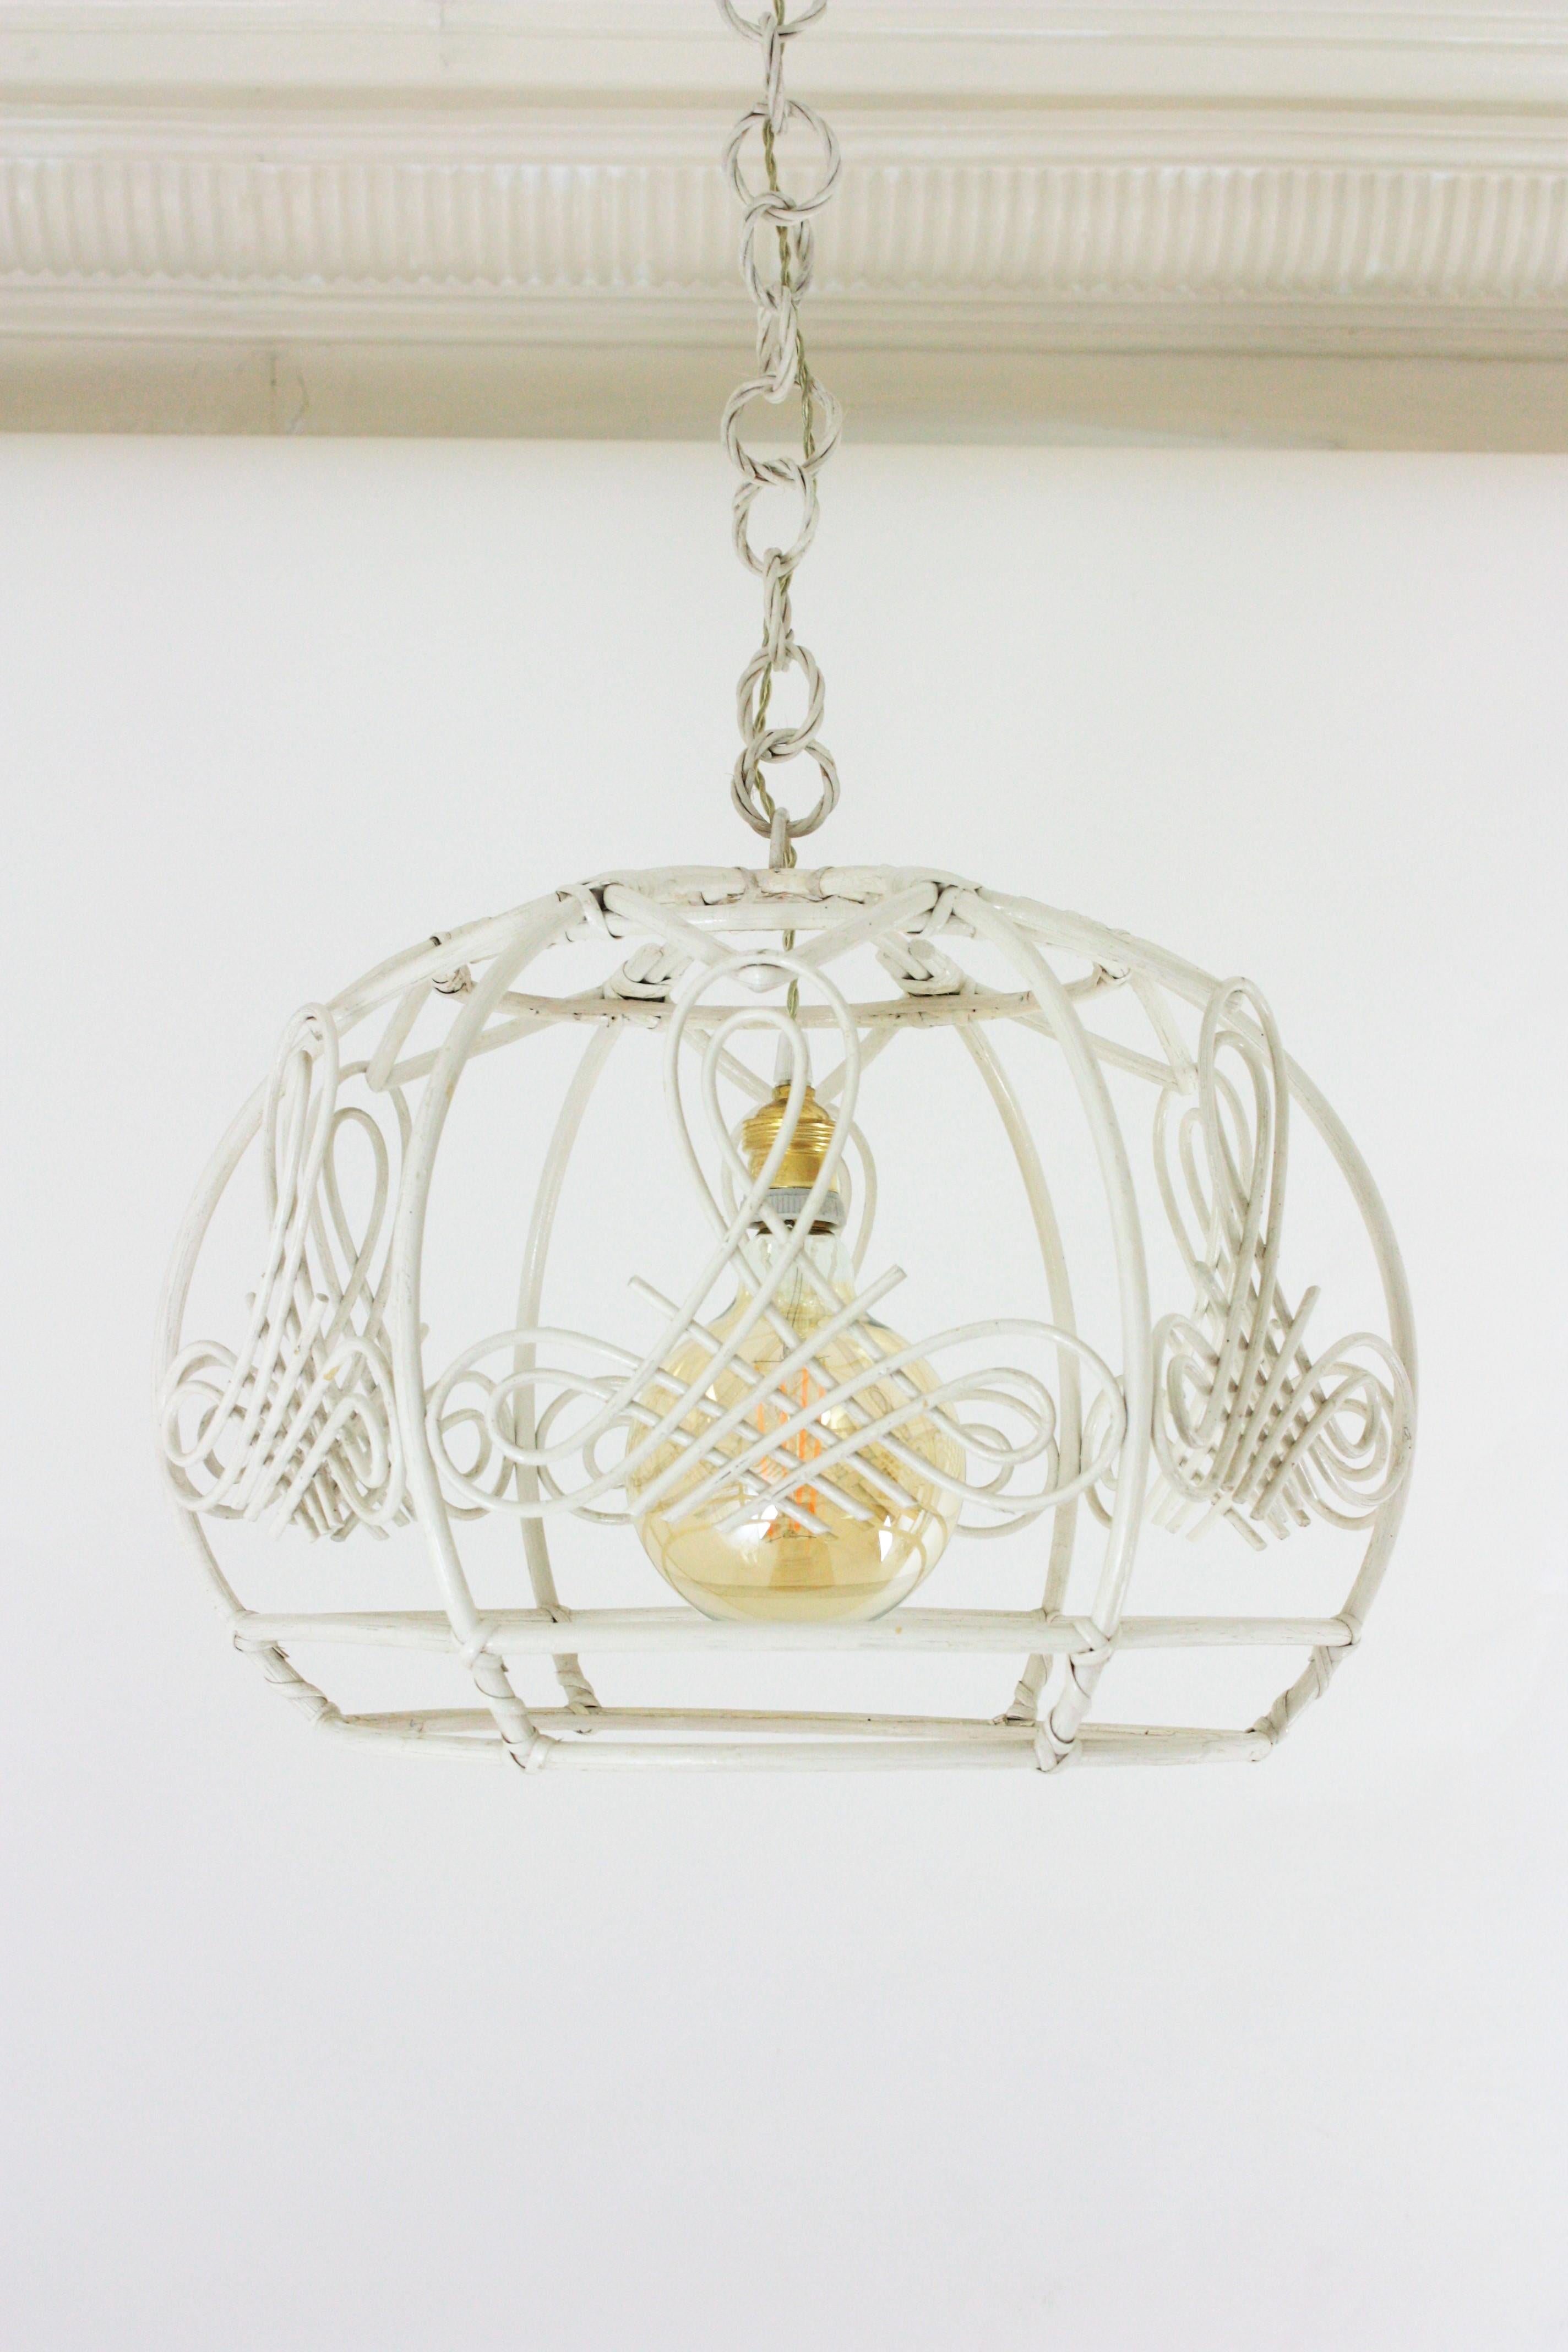 French Rattan Bell Pendant Lamp / Lantern in White Patina, 1960s For Sale 8